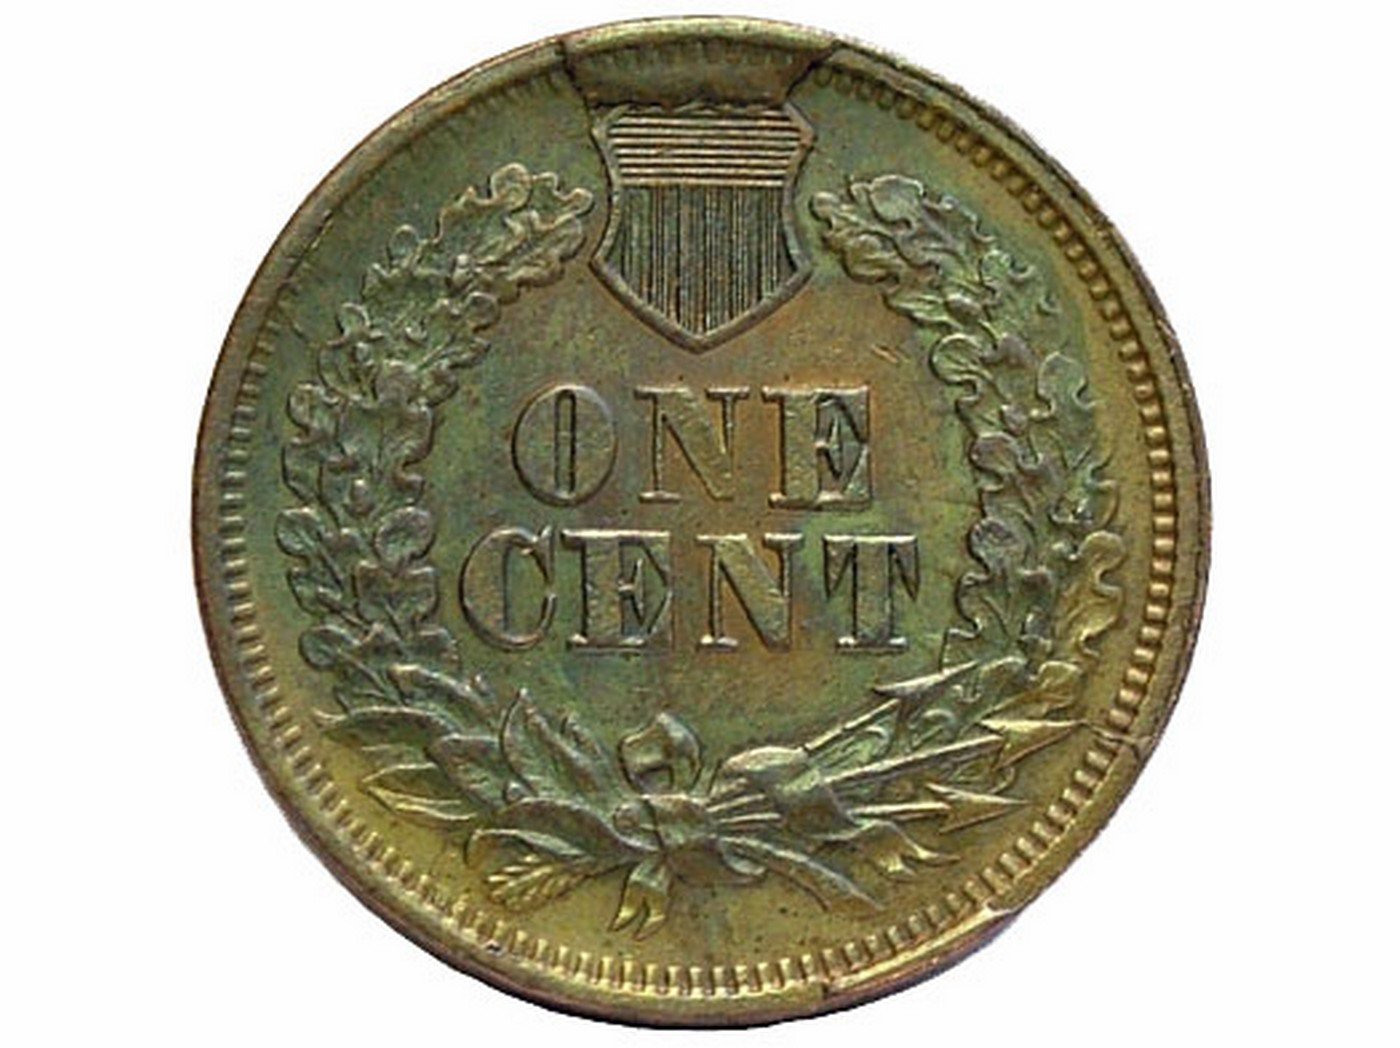 1866 CUD-004 - Indian Head Penny - Photo courtesy of Coinman_2000 and David Poliquin